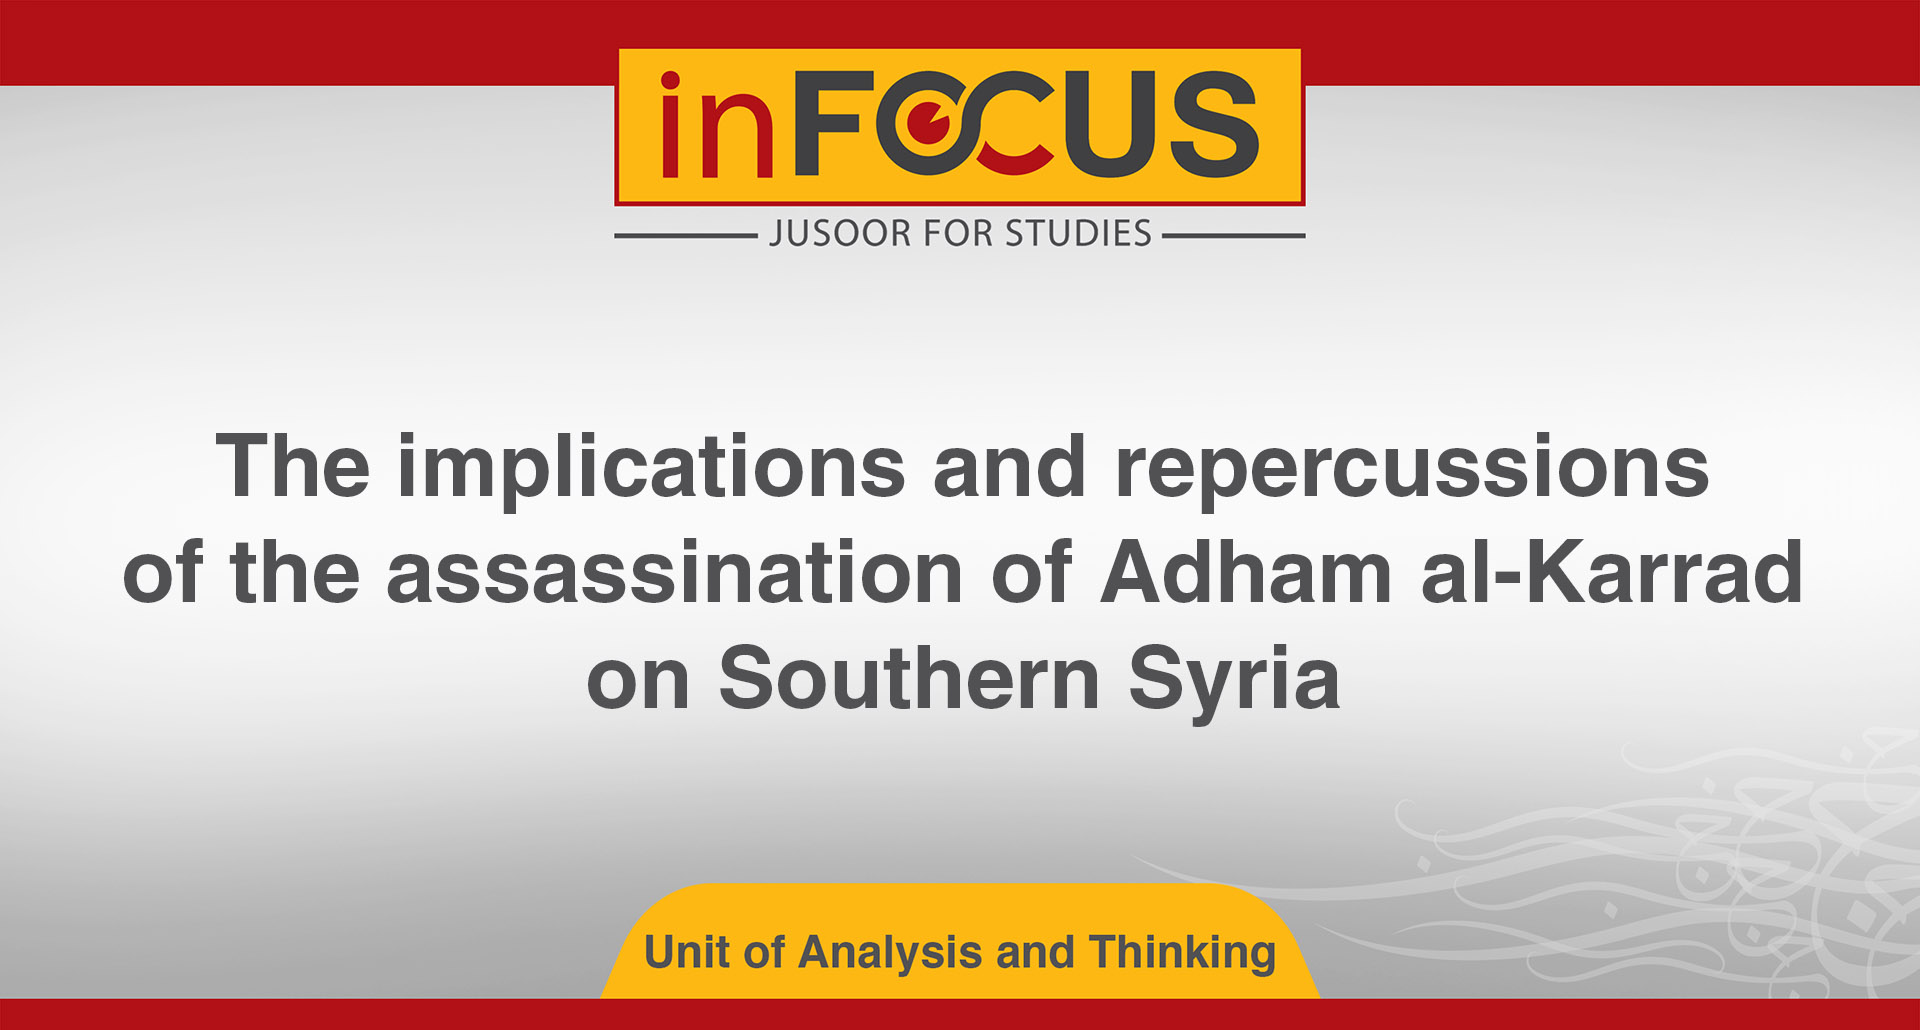 The implications and repercussions of the assassination of Adham al-Karrad on Southern Syria